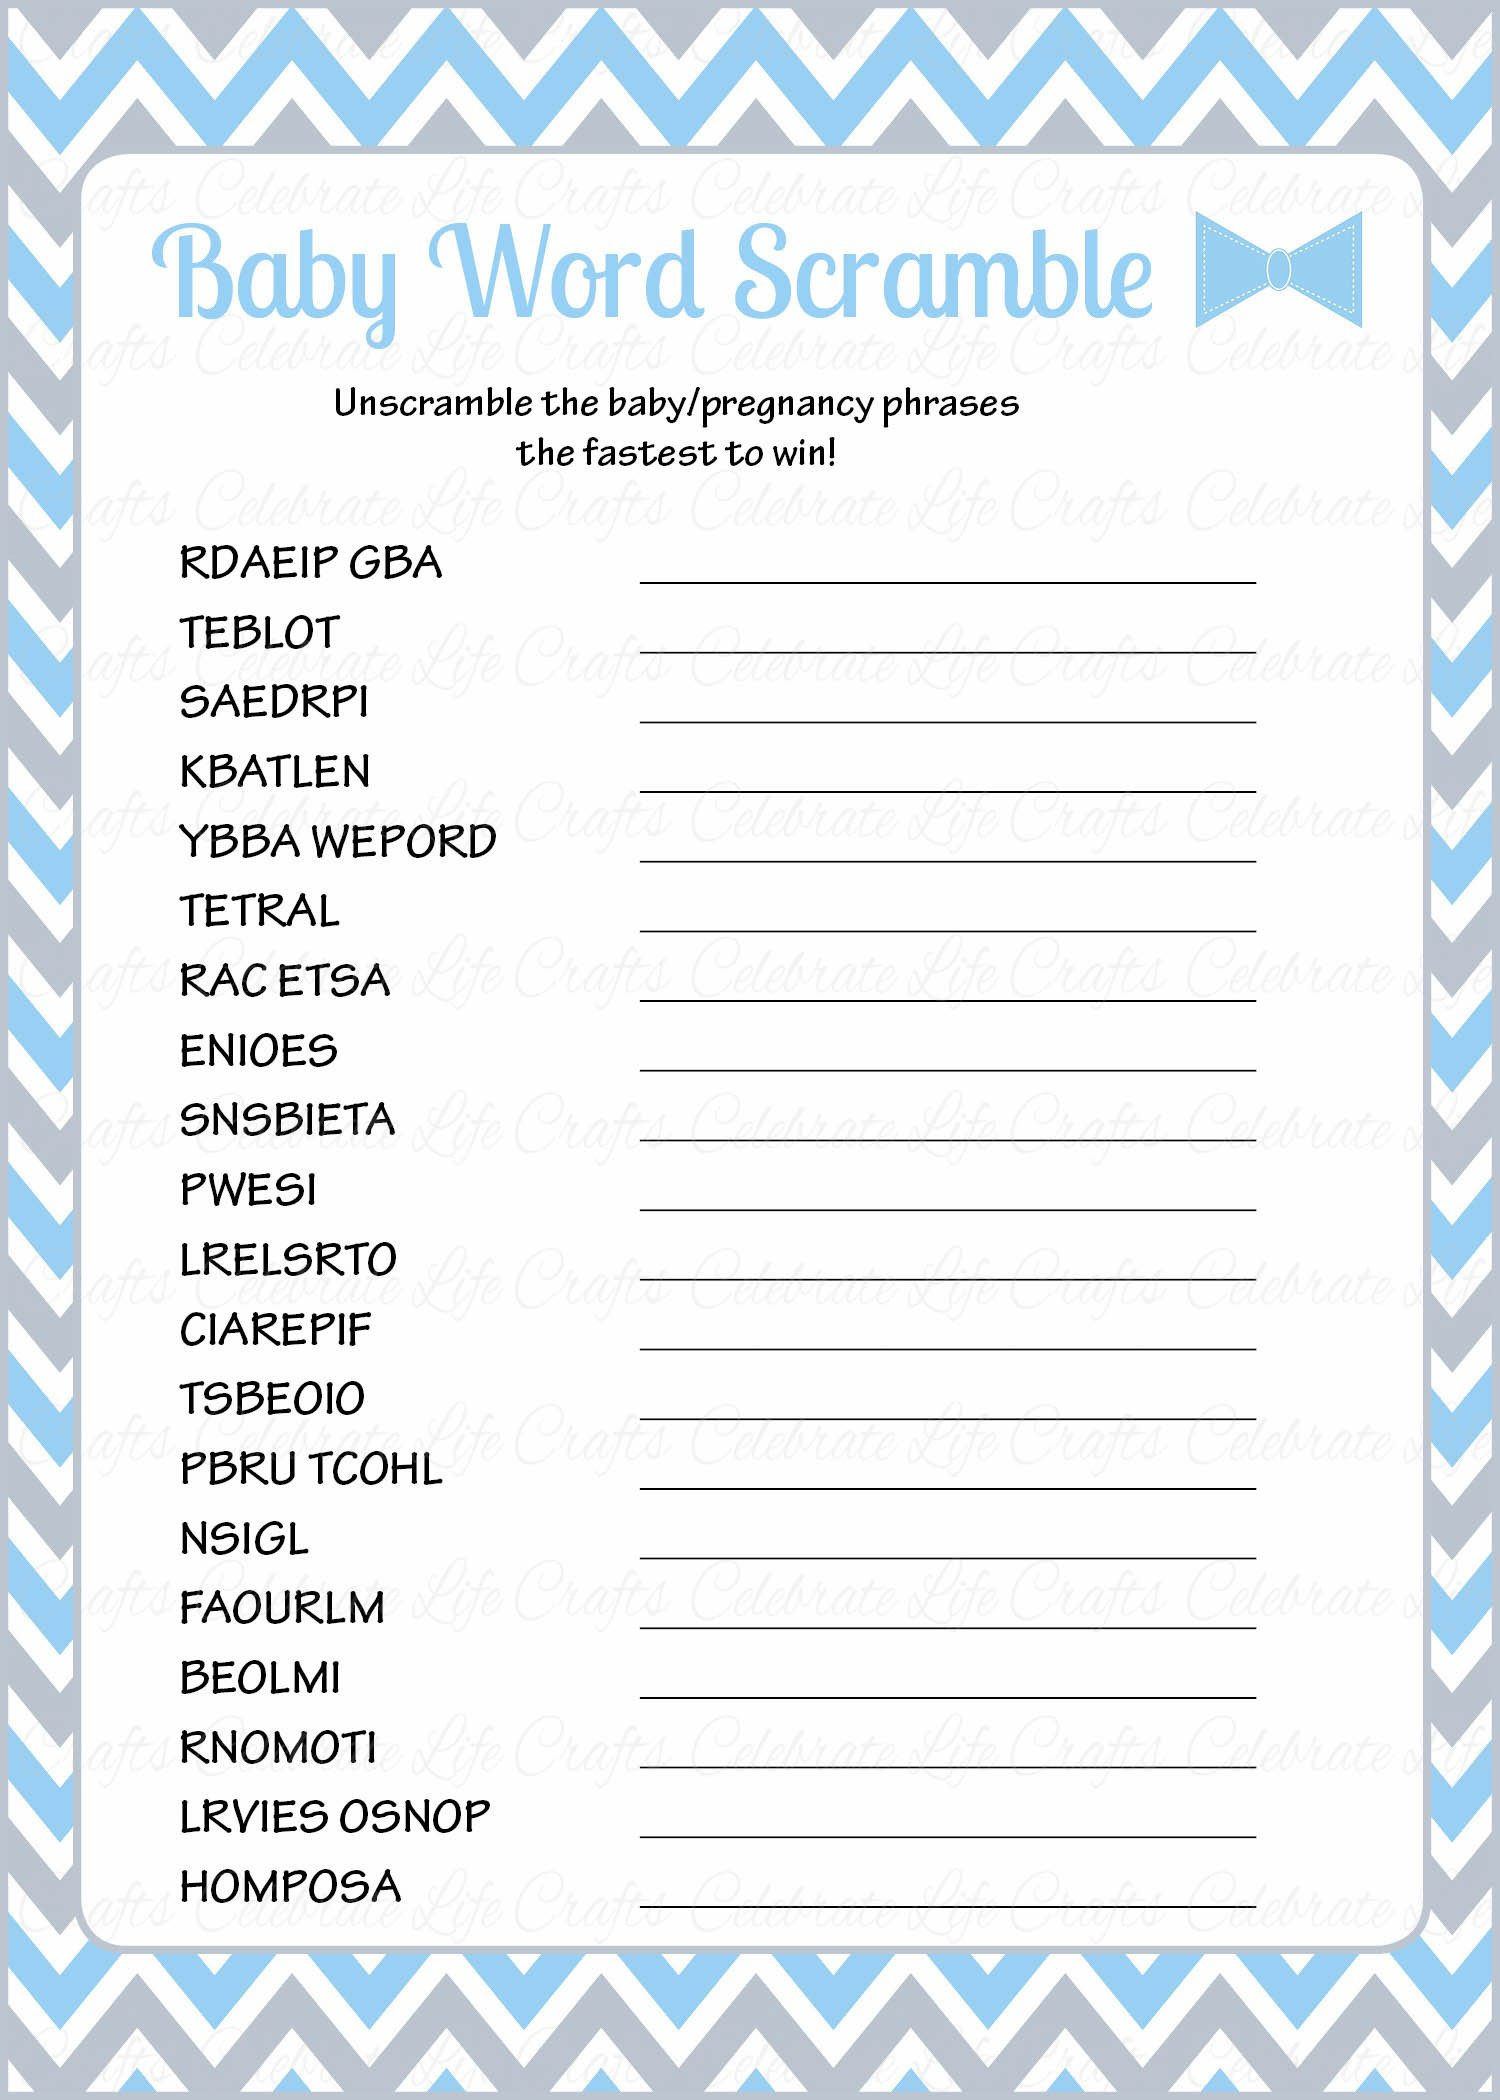 36 Adorable Baby Shower Word Scrambles | Kittybabylove - Free Printable Baby Shower Games Word Scramble